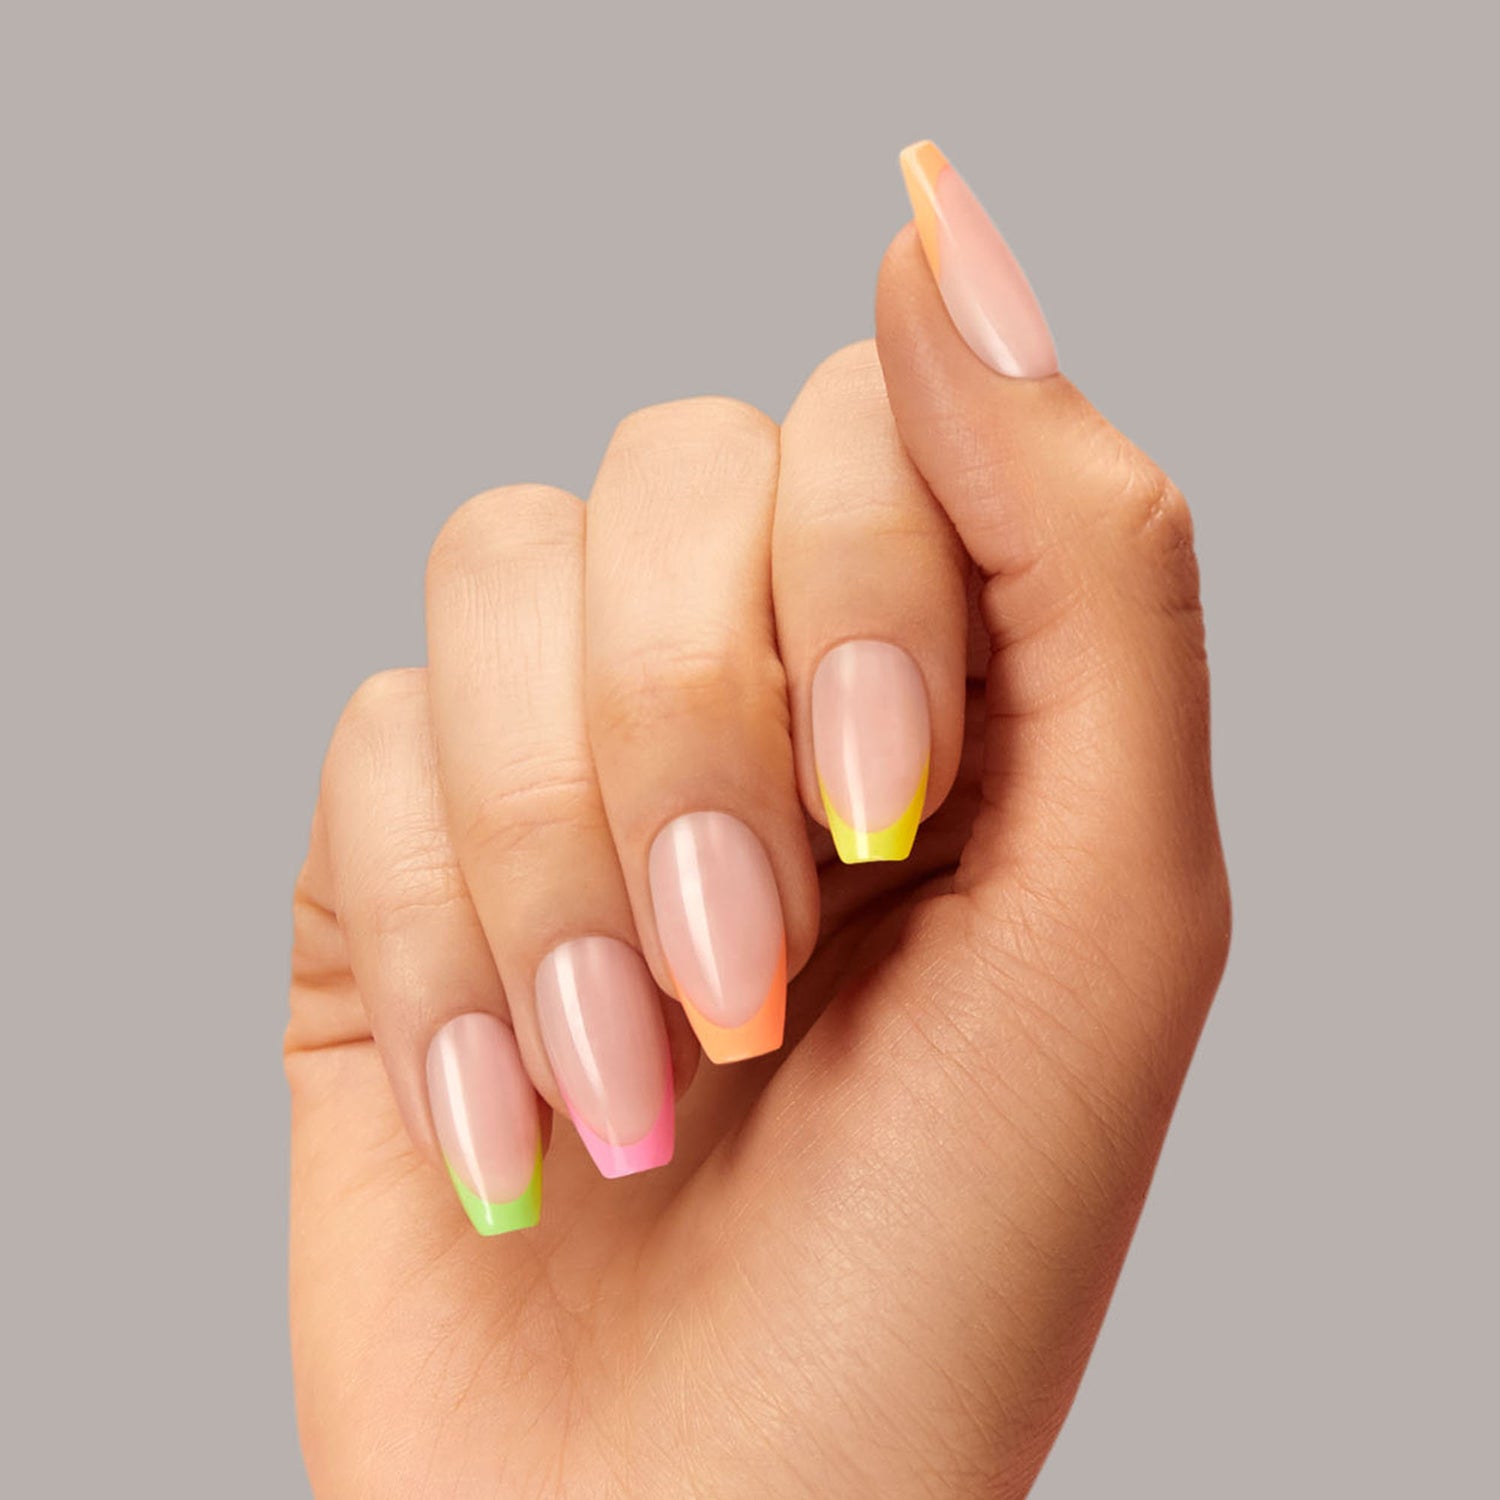 Long length, coffin shape, glossy finish. Sheer nude press-on gel nails featuring multicolor neon french tips.